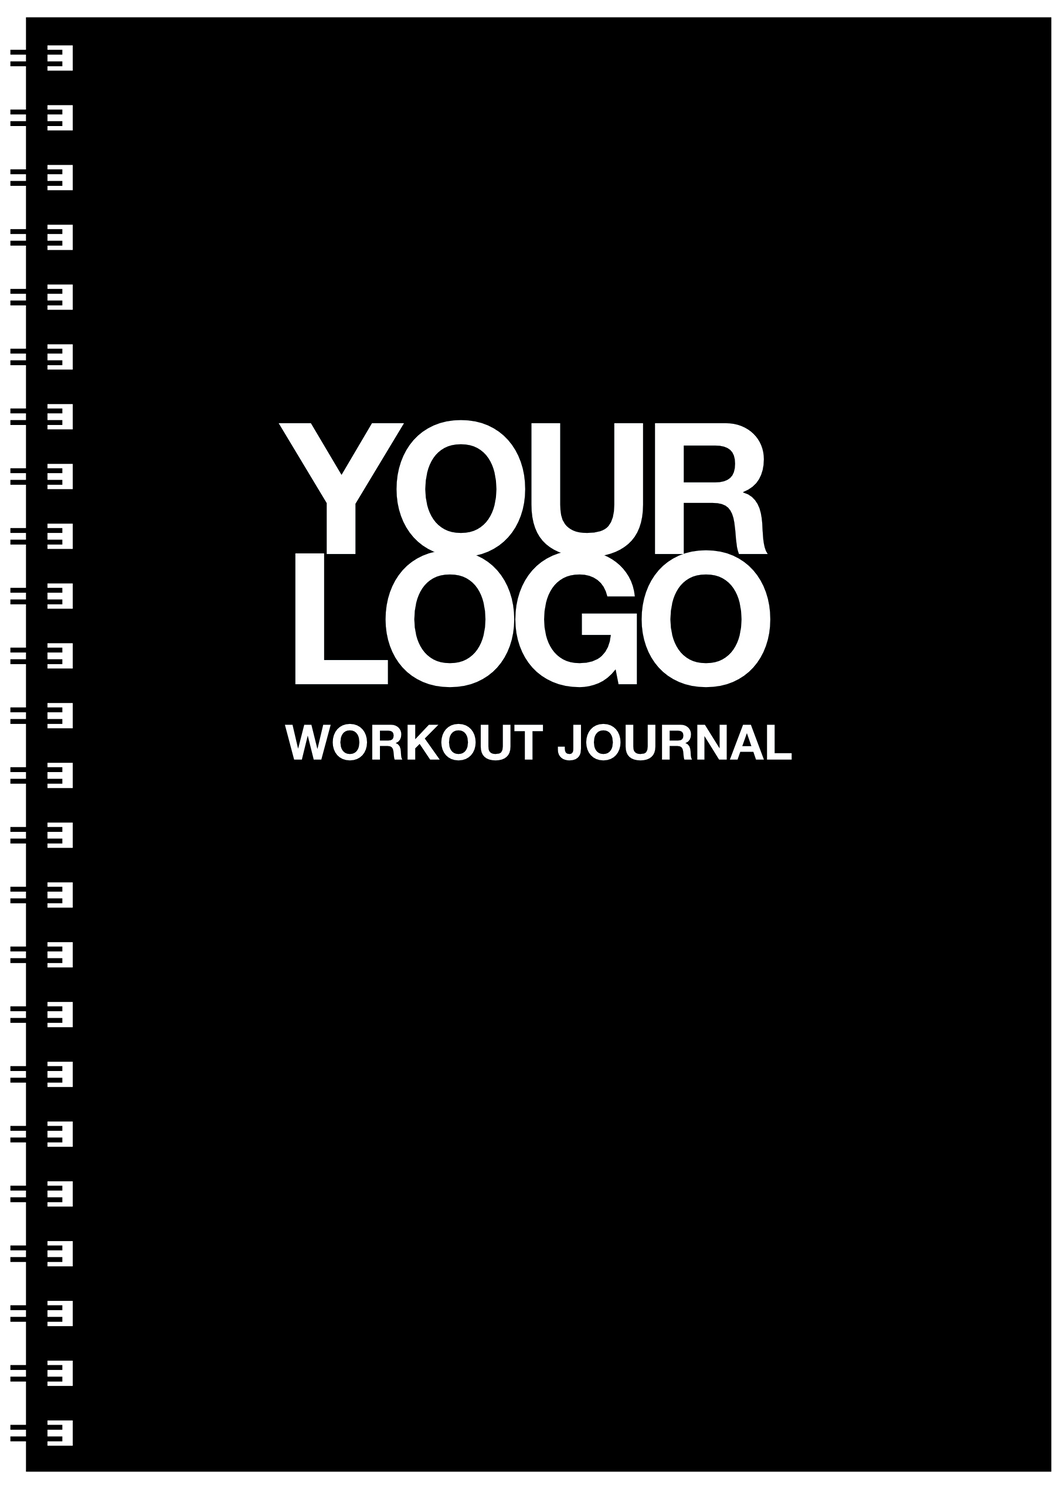 Customised Workout Journals for Gyms & PTs